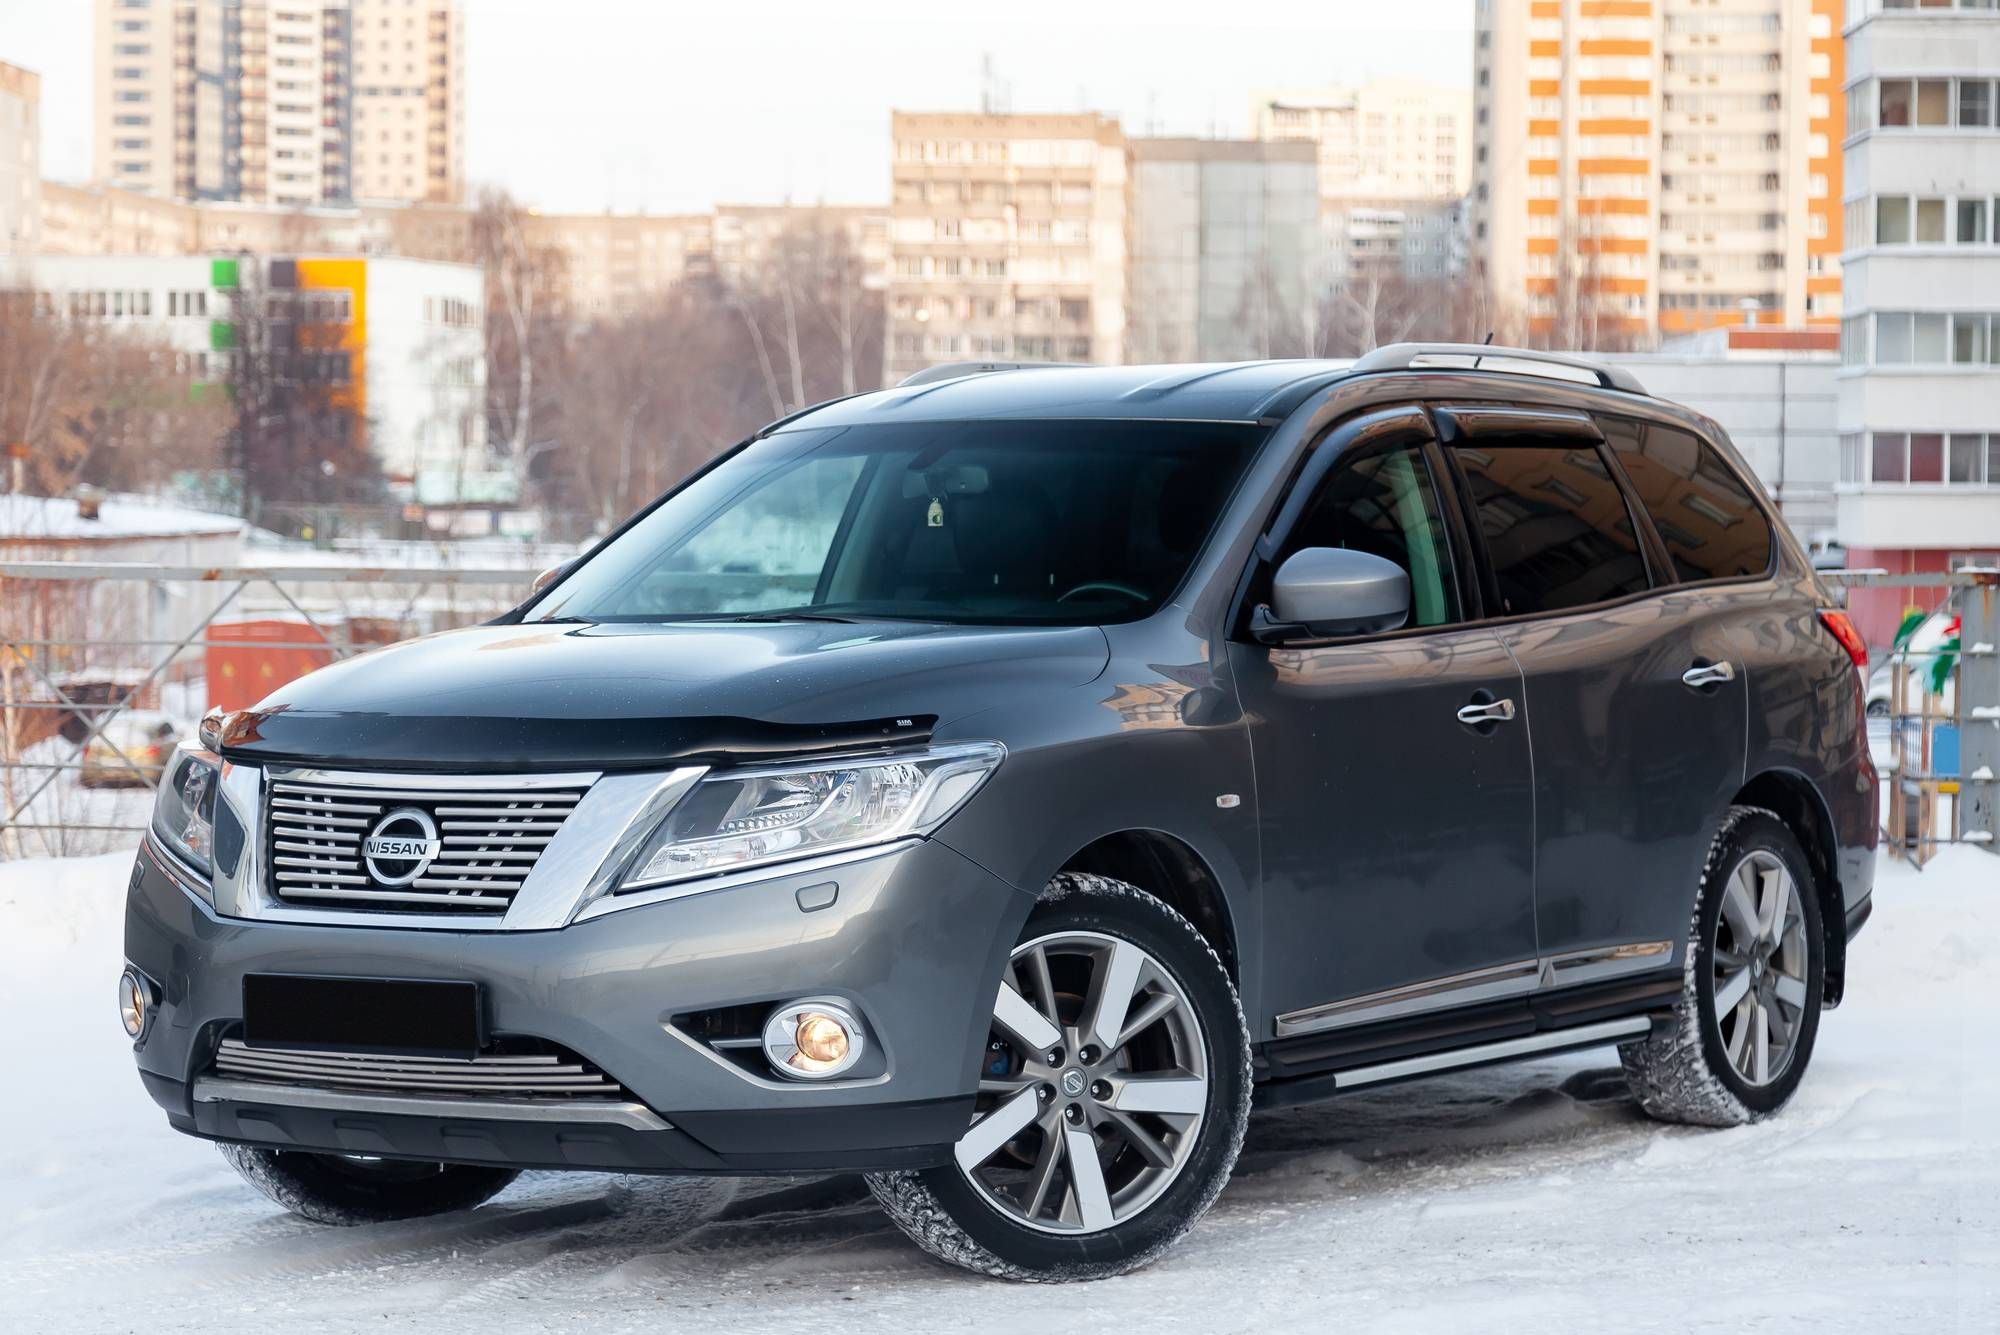 2015 Nissan Pathfinder recall has been issued due to brake light issues.